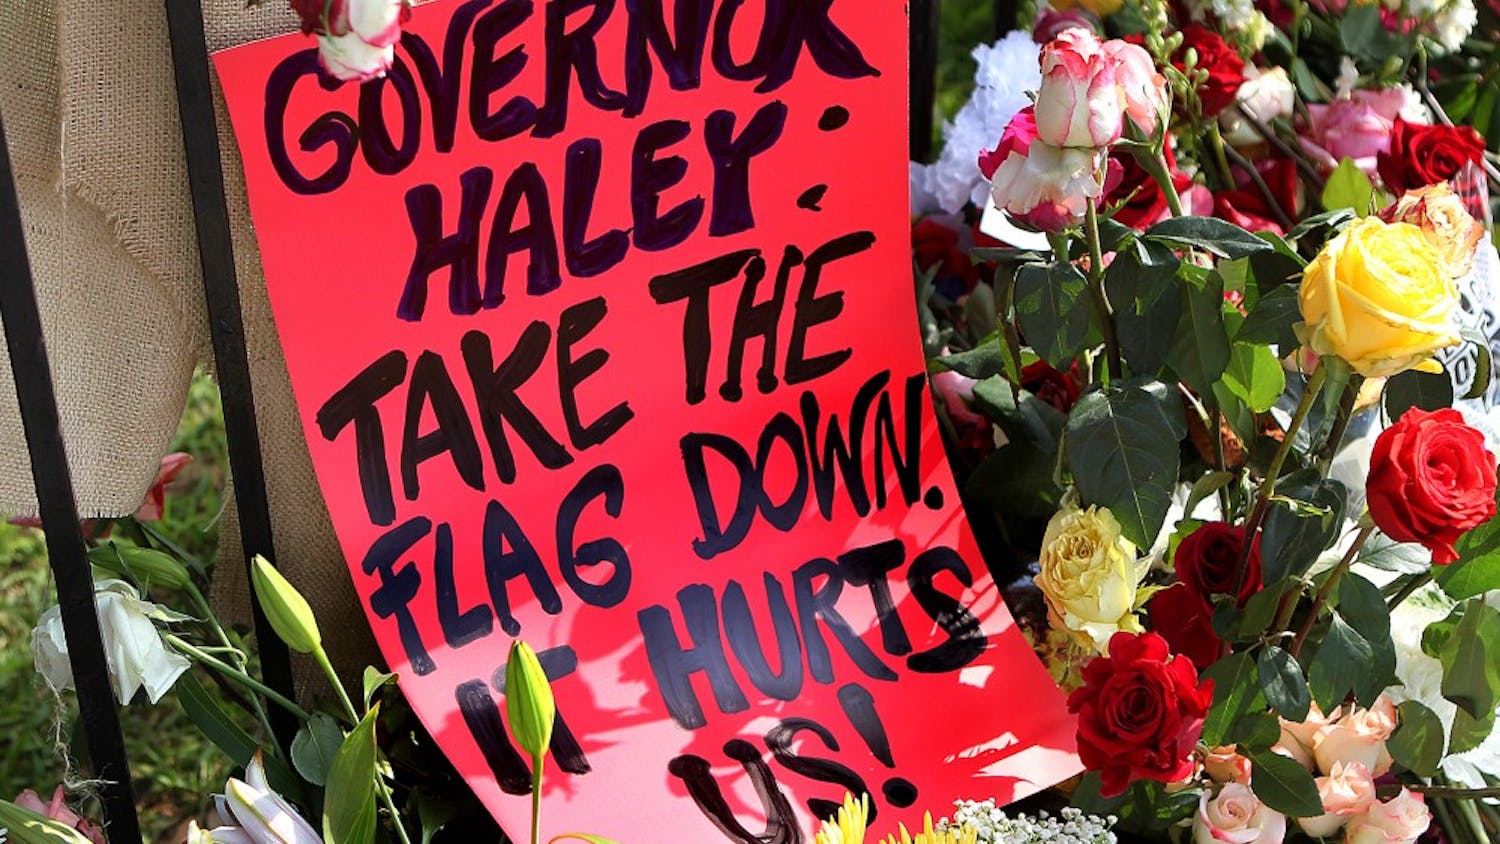 A sign urging South Carolina Gov. Nikki Haley to take down the confederate flag is part of the sidewalk memorial at the "Mother" Emanuel A.M.E. Church on Saturday, June 20, 2015, in Charleston, S.C. (Curtis Compton/Atlanta Journal-Constitution/TNS)